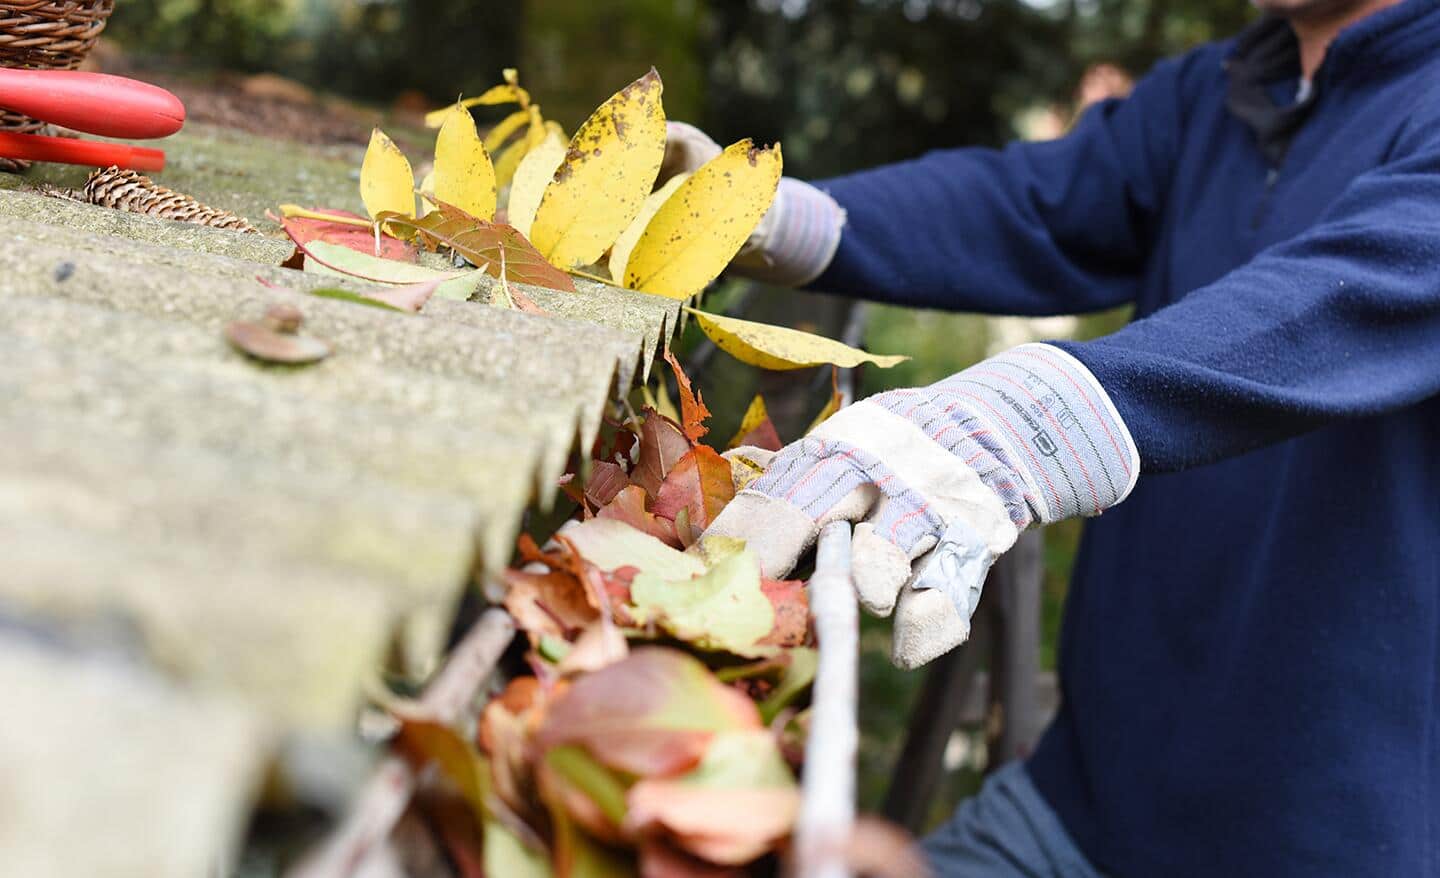 A gloved hand cleaning a gutter clogged with leaves.